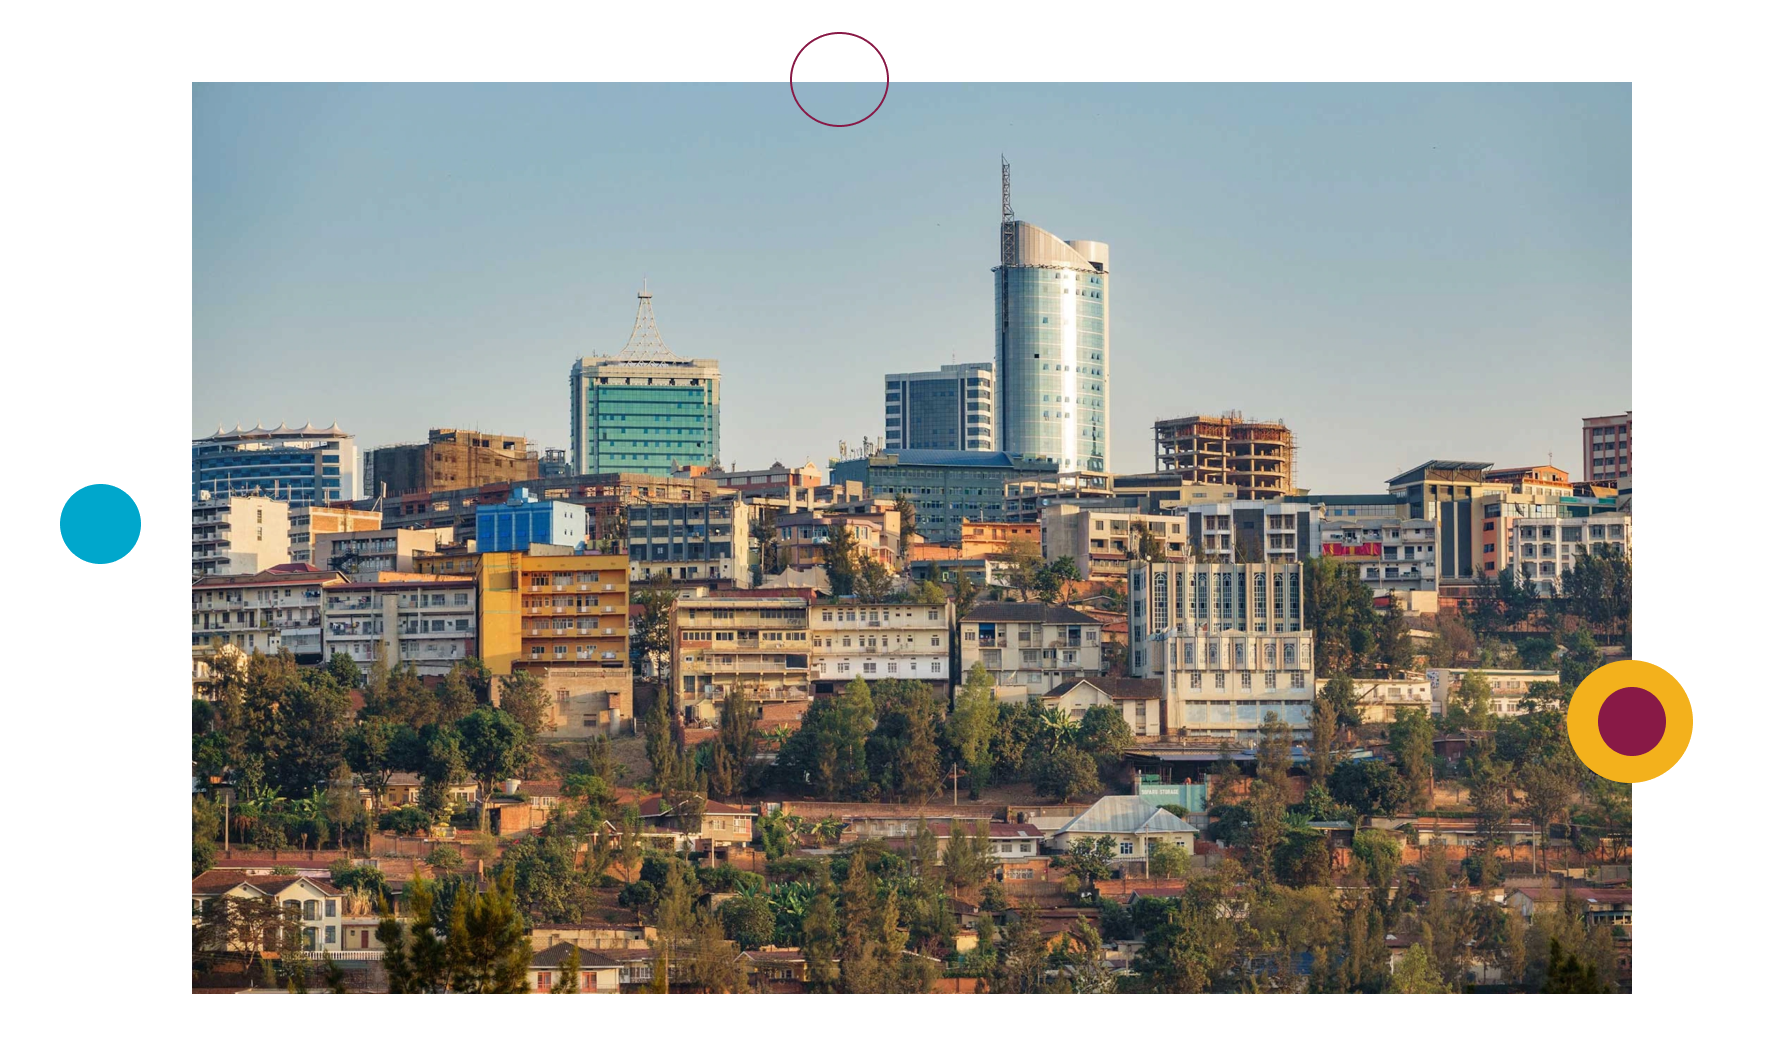 Dalberg expands into Rwanda with new office in Kigali